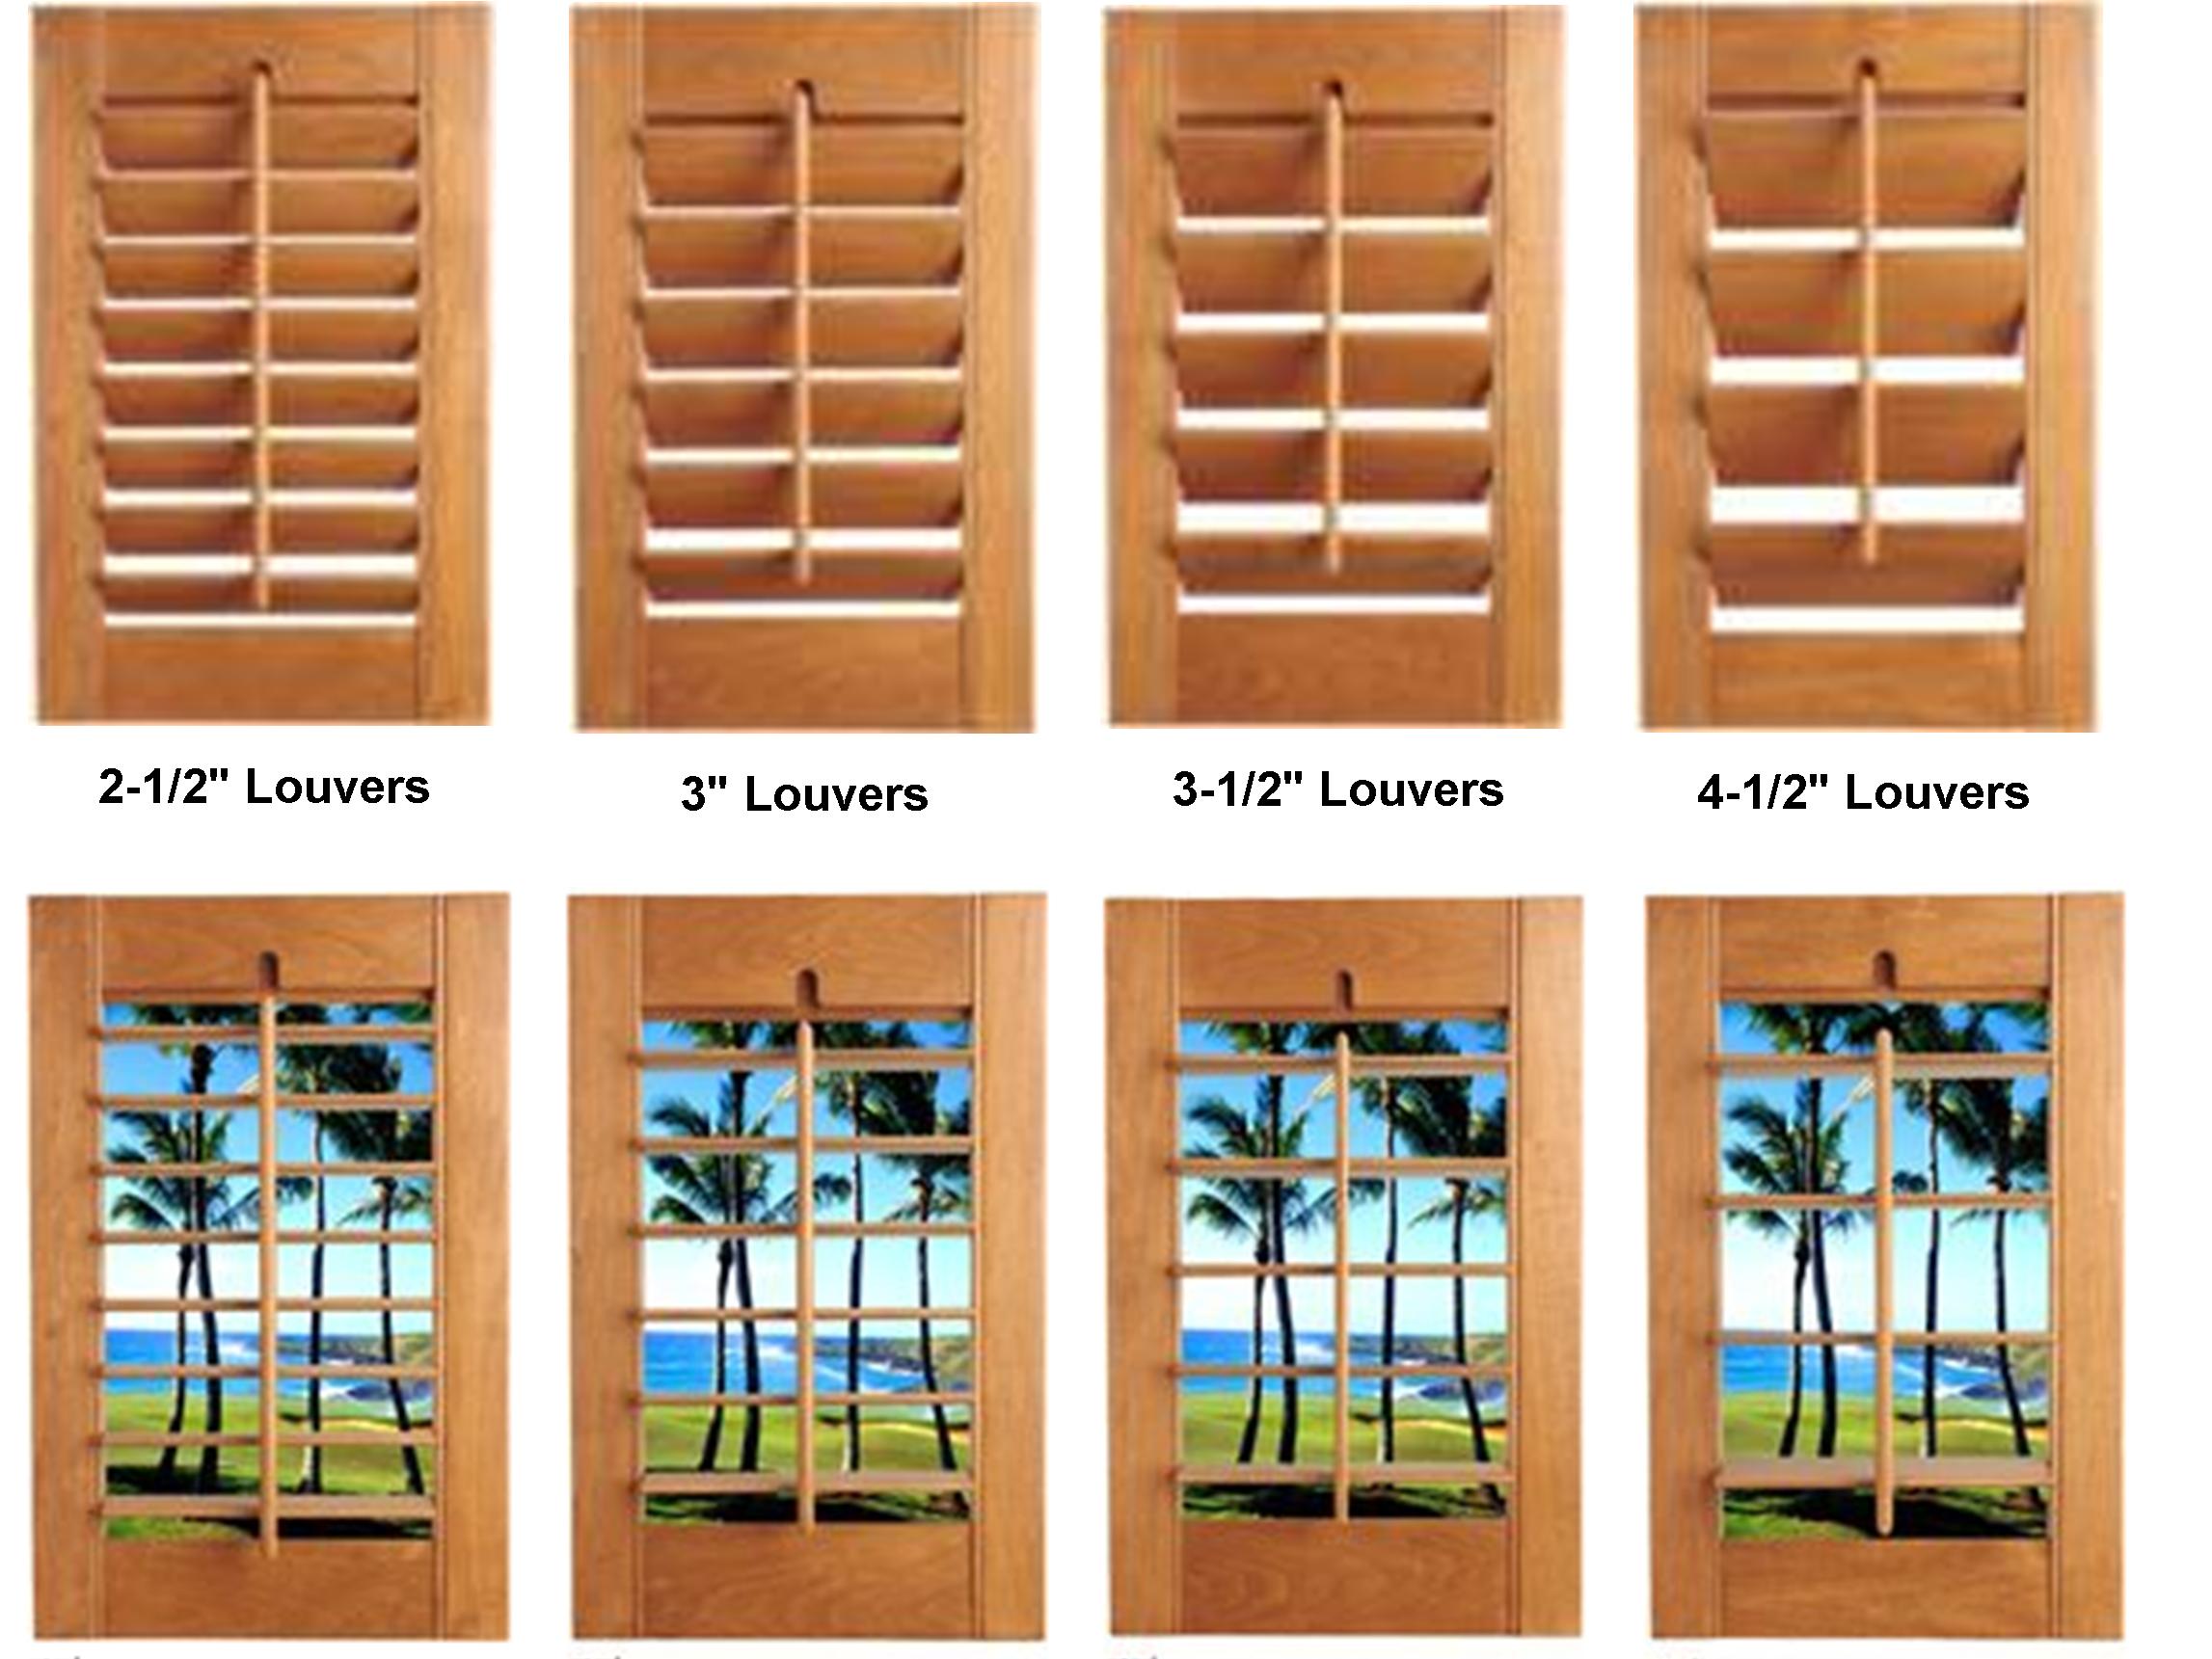 LOUVER SIZES - Shutters, Blinds, Window Blinds, Plantation Shutters, Vertical Blinds, Wood Shutters, Venetian Blinds, Window Shutters, Roman Shades